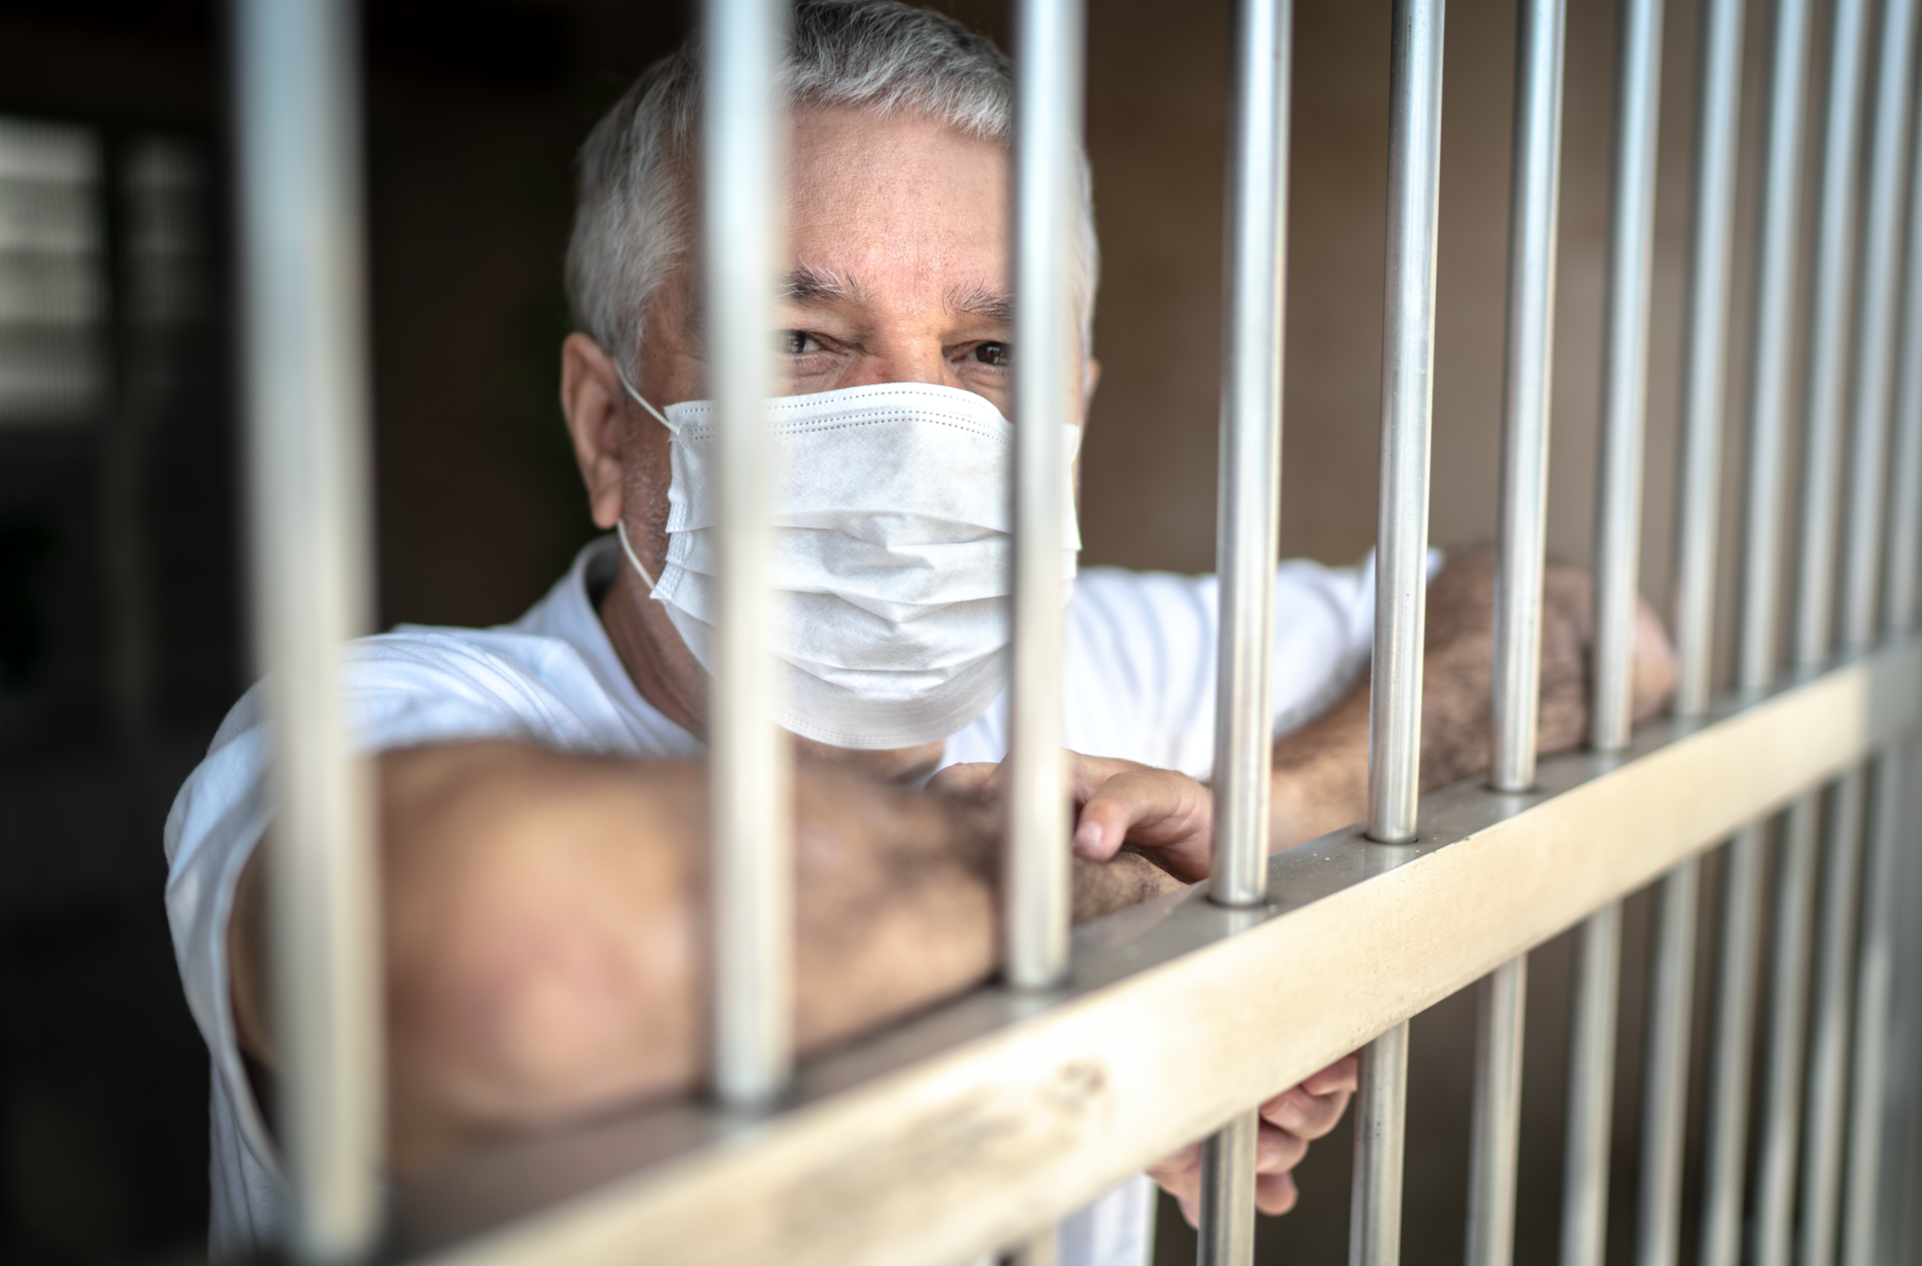 A man with a facemask shown behind bars